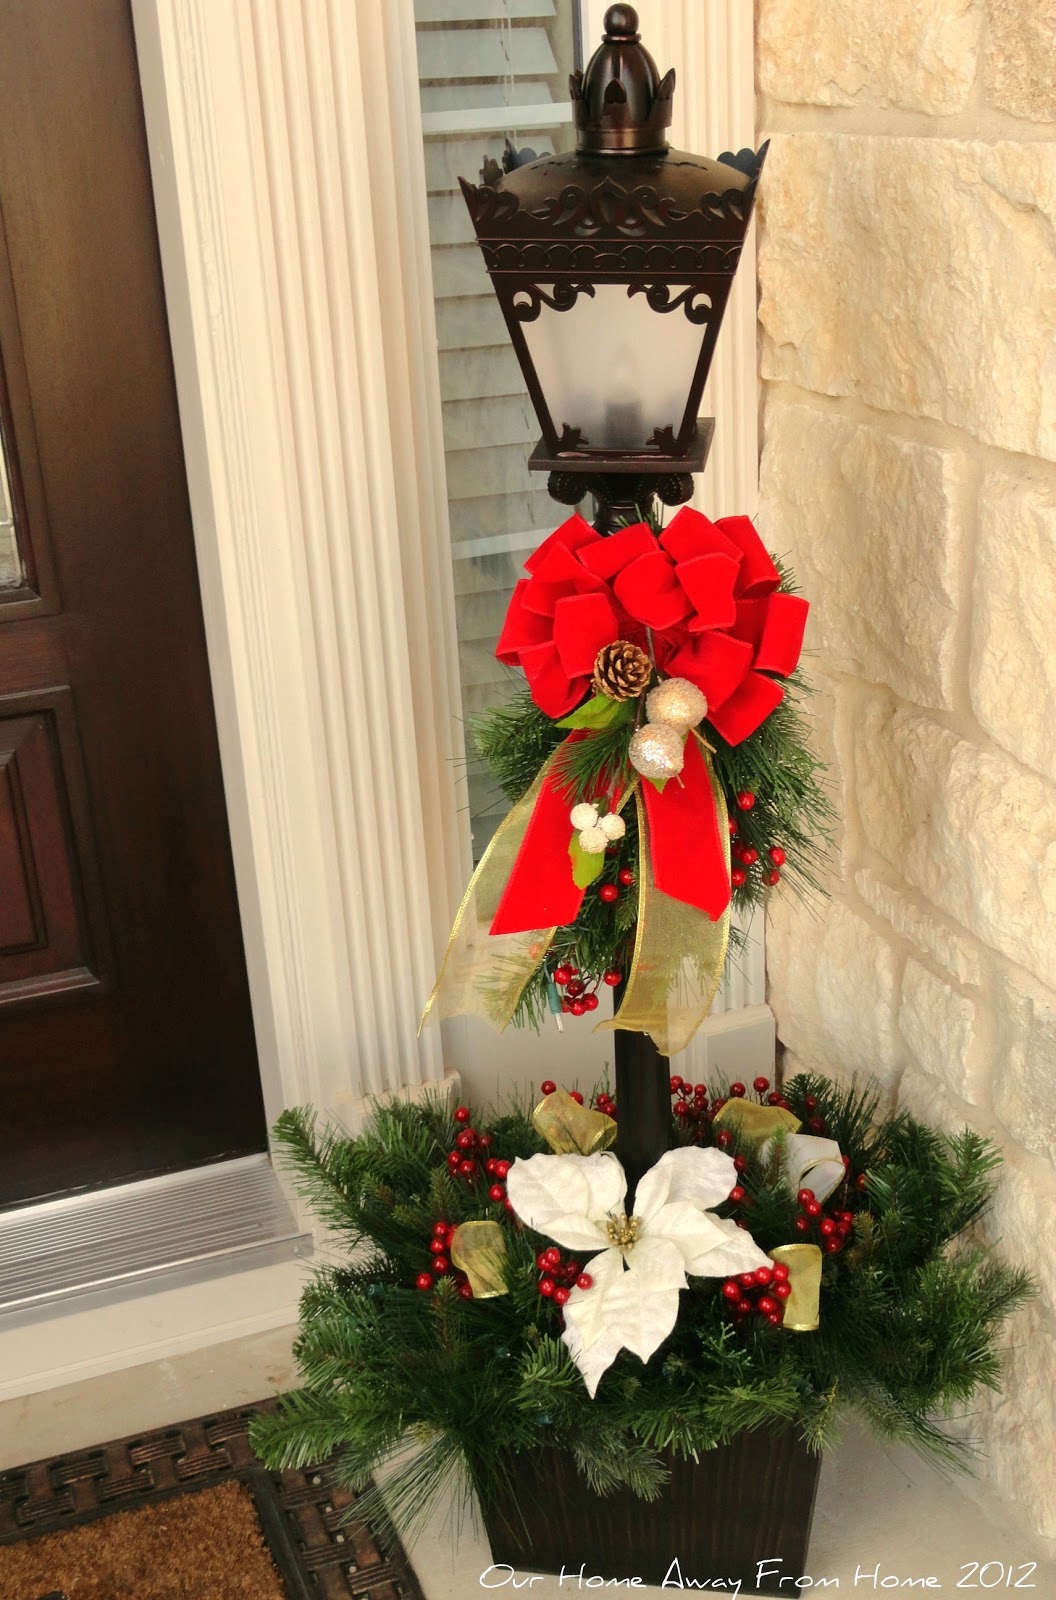 Our Home Away From Home: CHRISTMAS ON THE FRONT PORCH